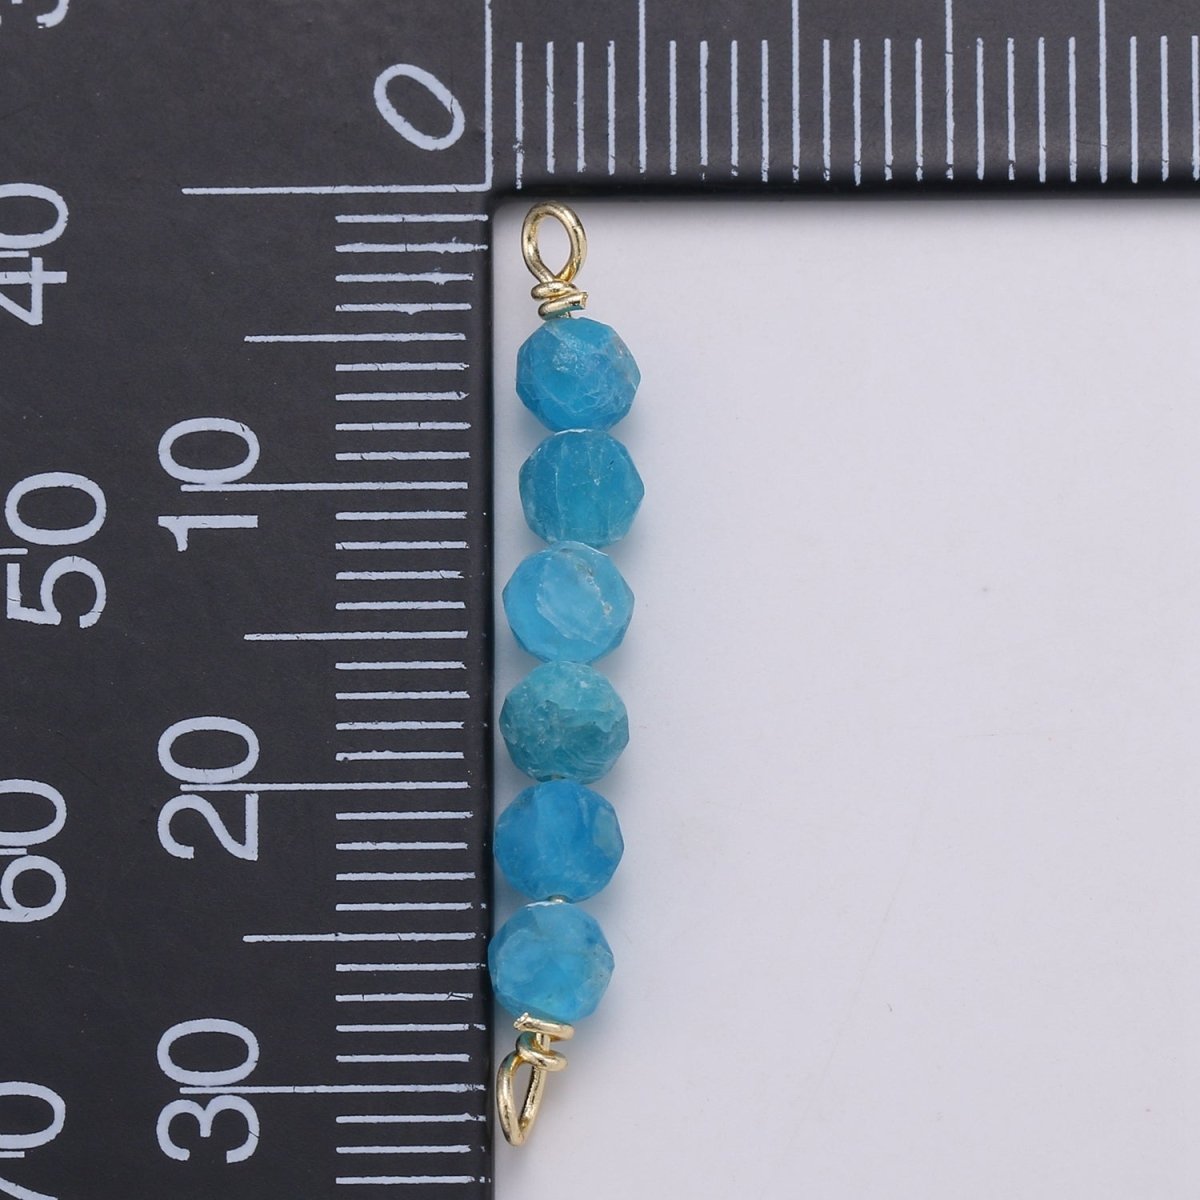 beads Connector for Necklace Bracelet Earring jewelry supplies Component in 14k Gold Filled wire Finding Natural Stone Beads F-530 - F-542 - DLUXCA